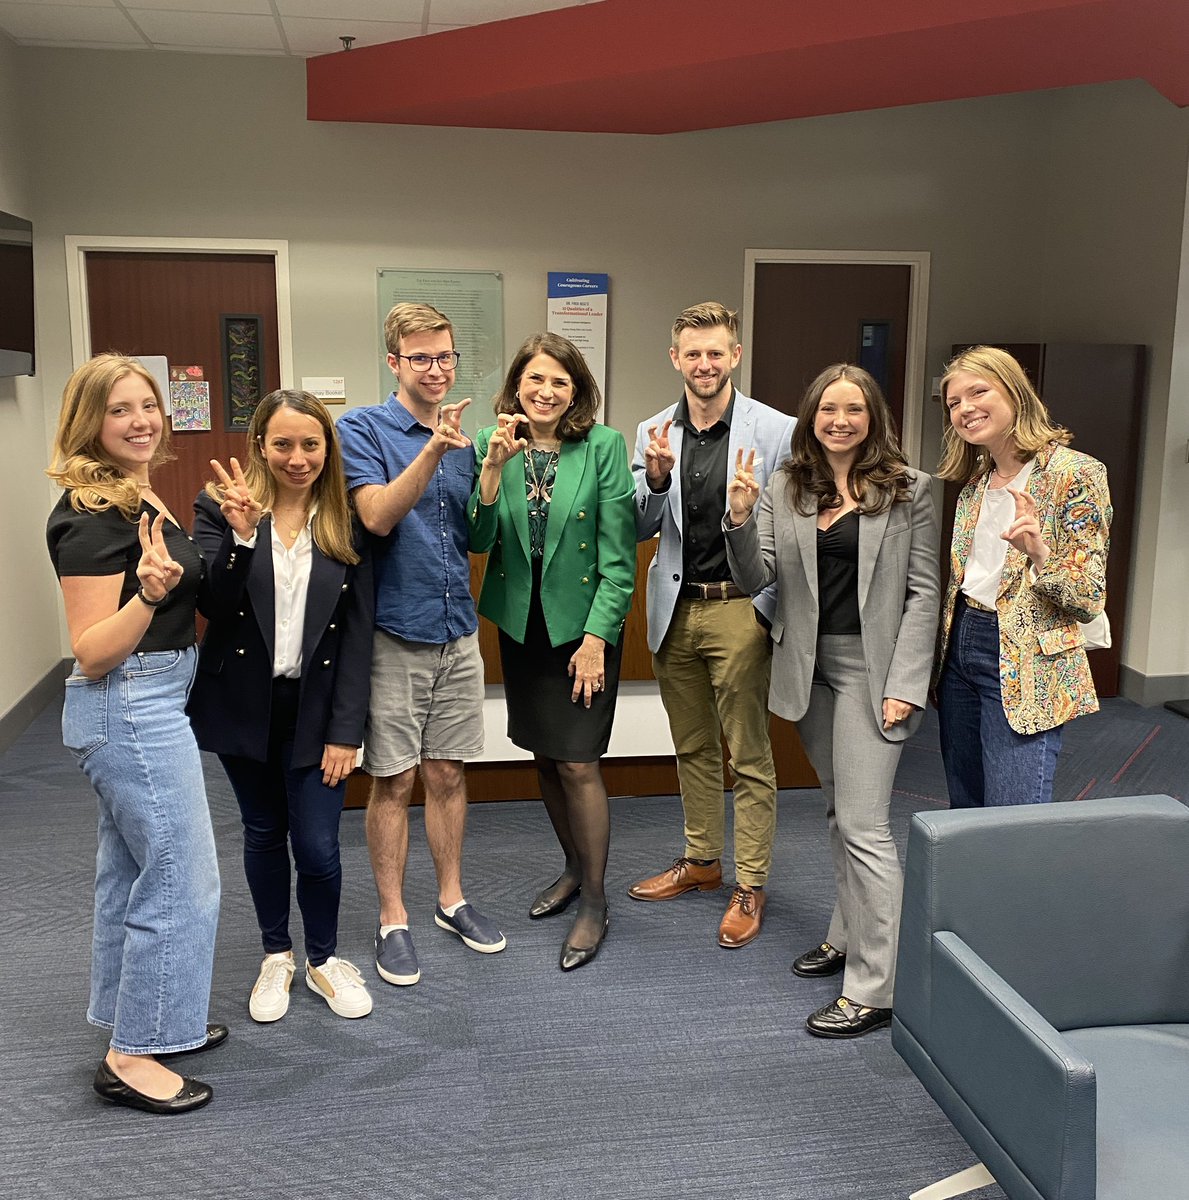 Lively discussion with students from @SMU, @UofDallas, @UTArlington, @UT_Dallas about @doscareers & how we’re modernizing our workforce @StateDept & @StatePRM. Also proud to share how campus communities change lives welcoming refugees through @WelcomeCorps on Campus.